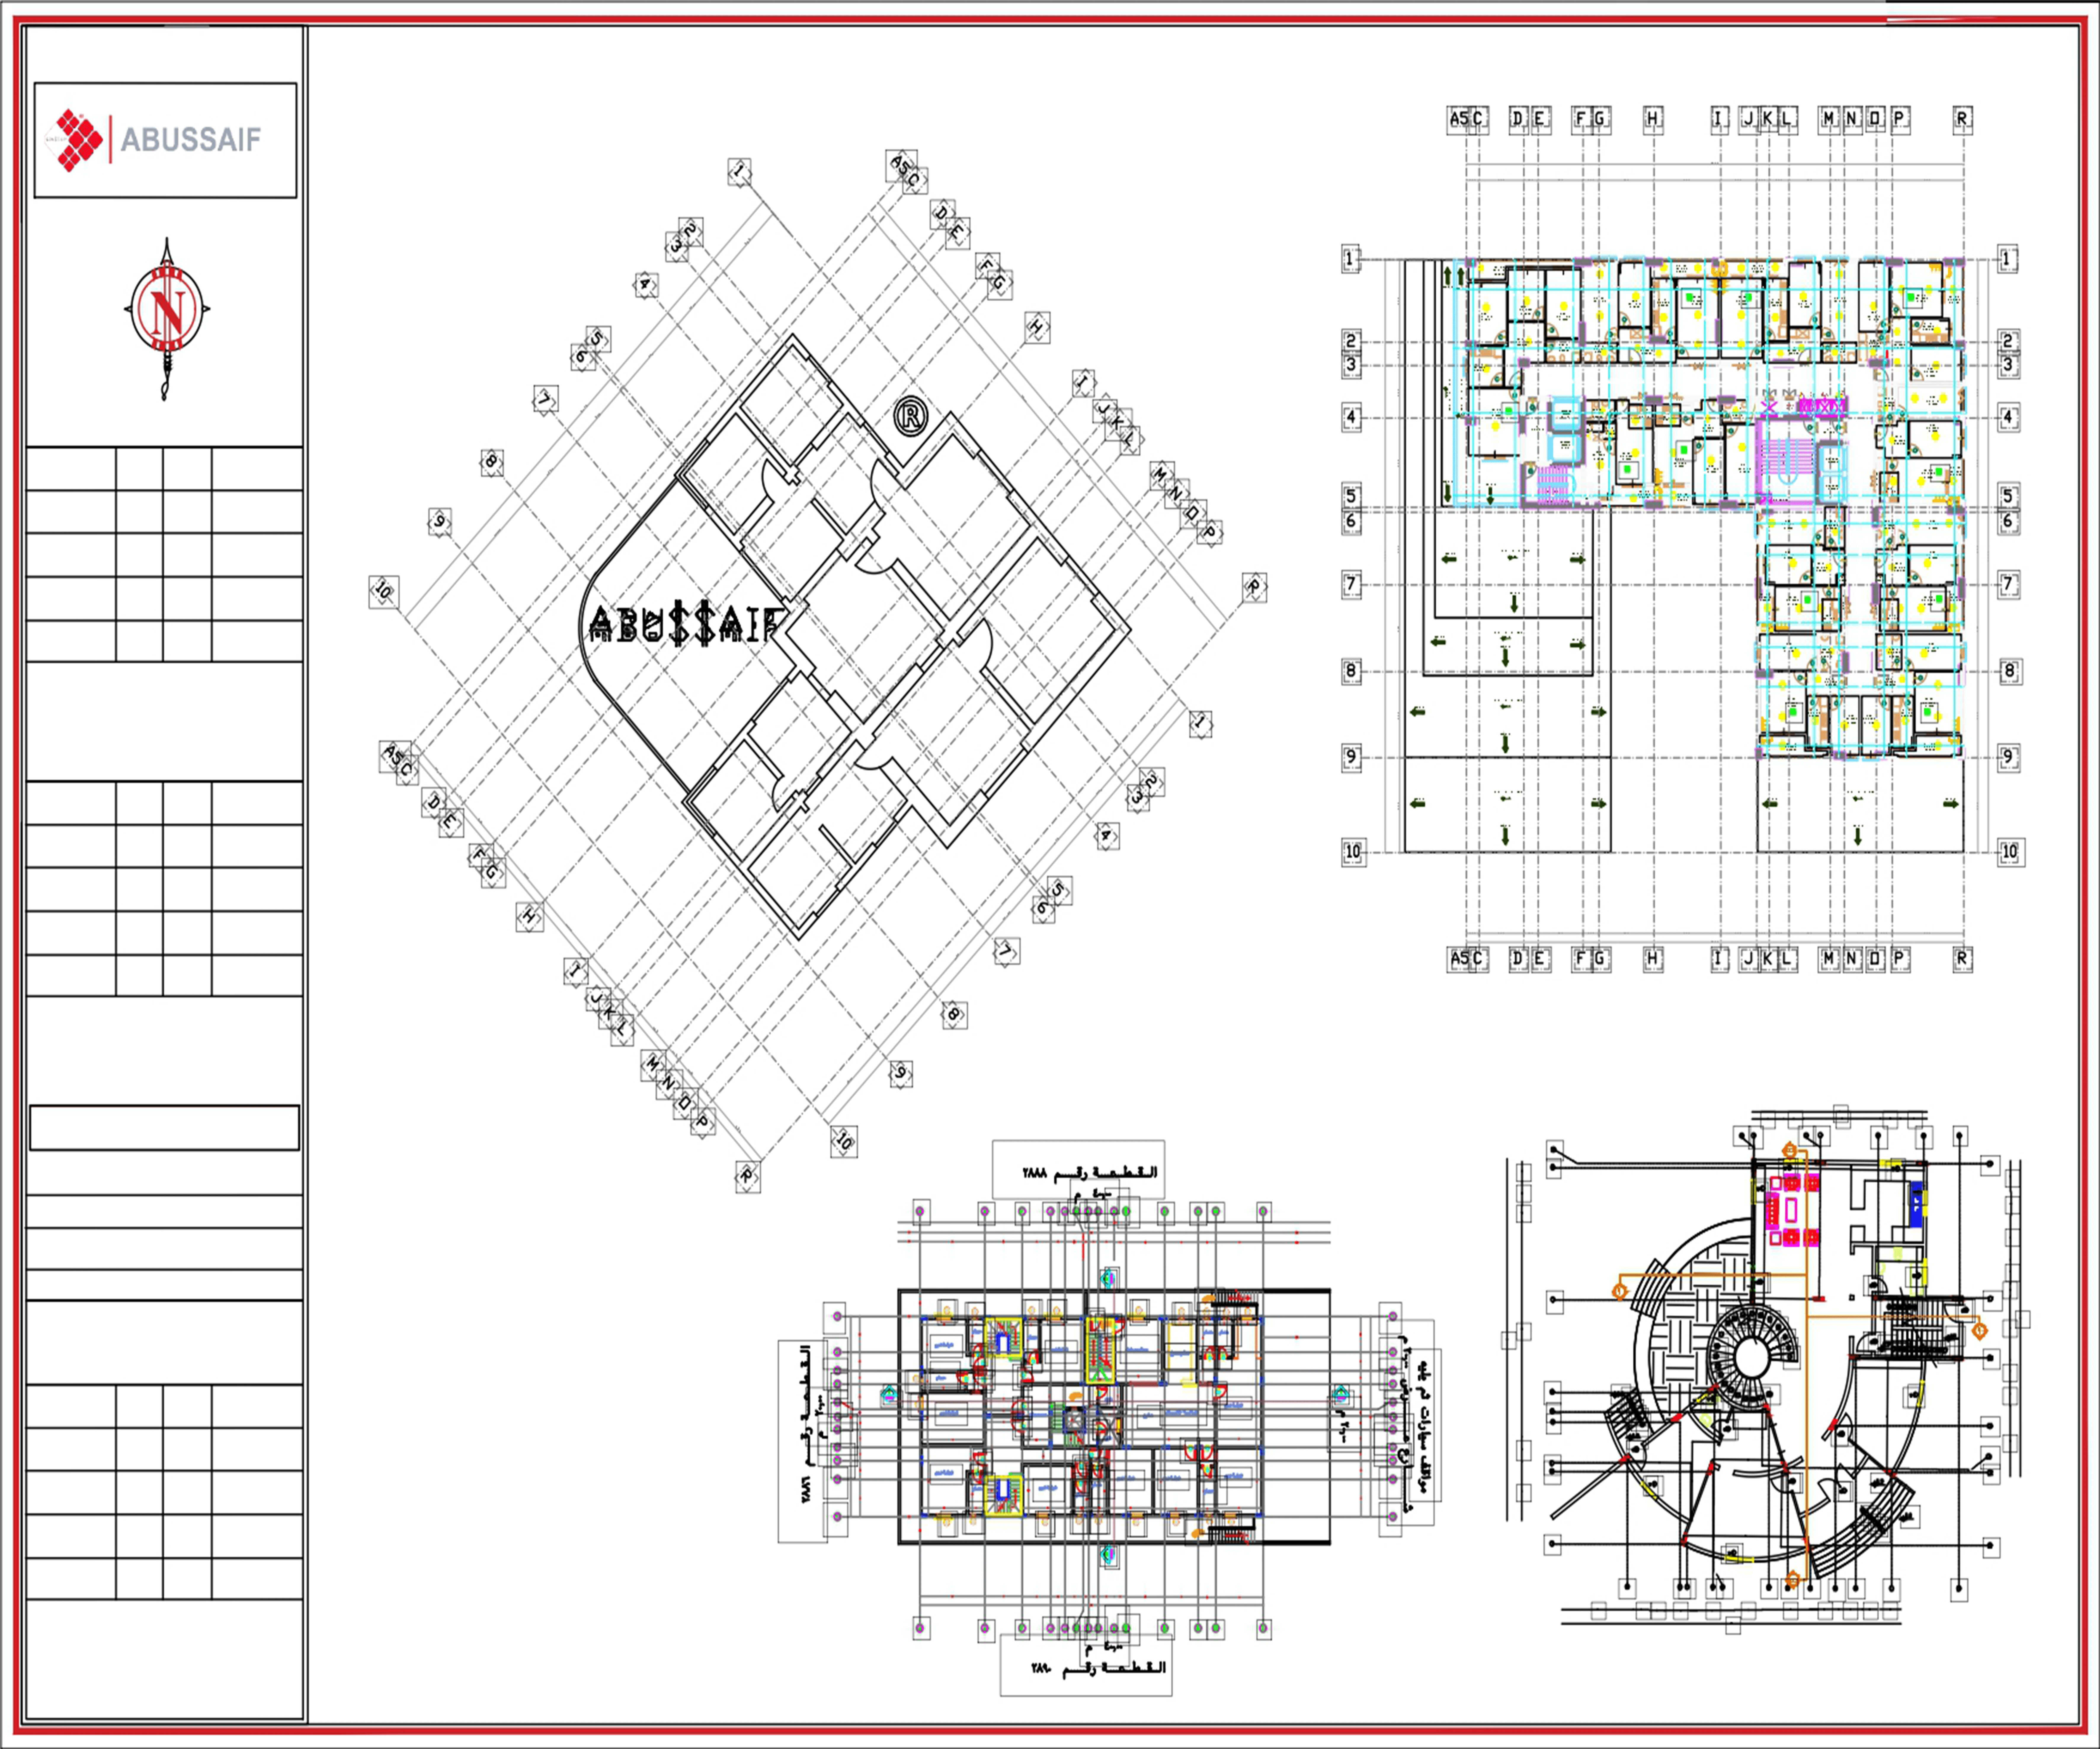 Plans: The architectural concept design after determining the construction requirements for the site of any project.